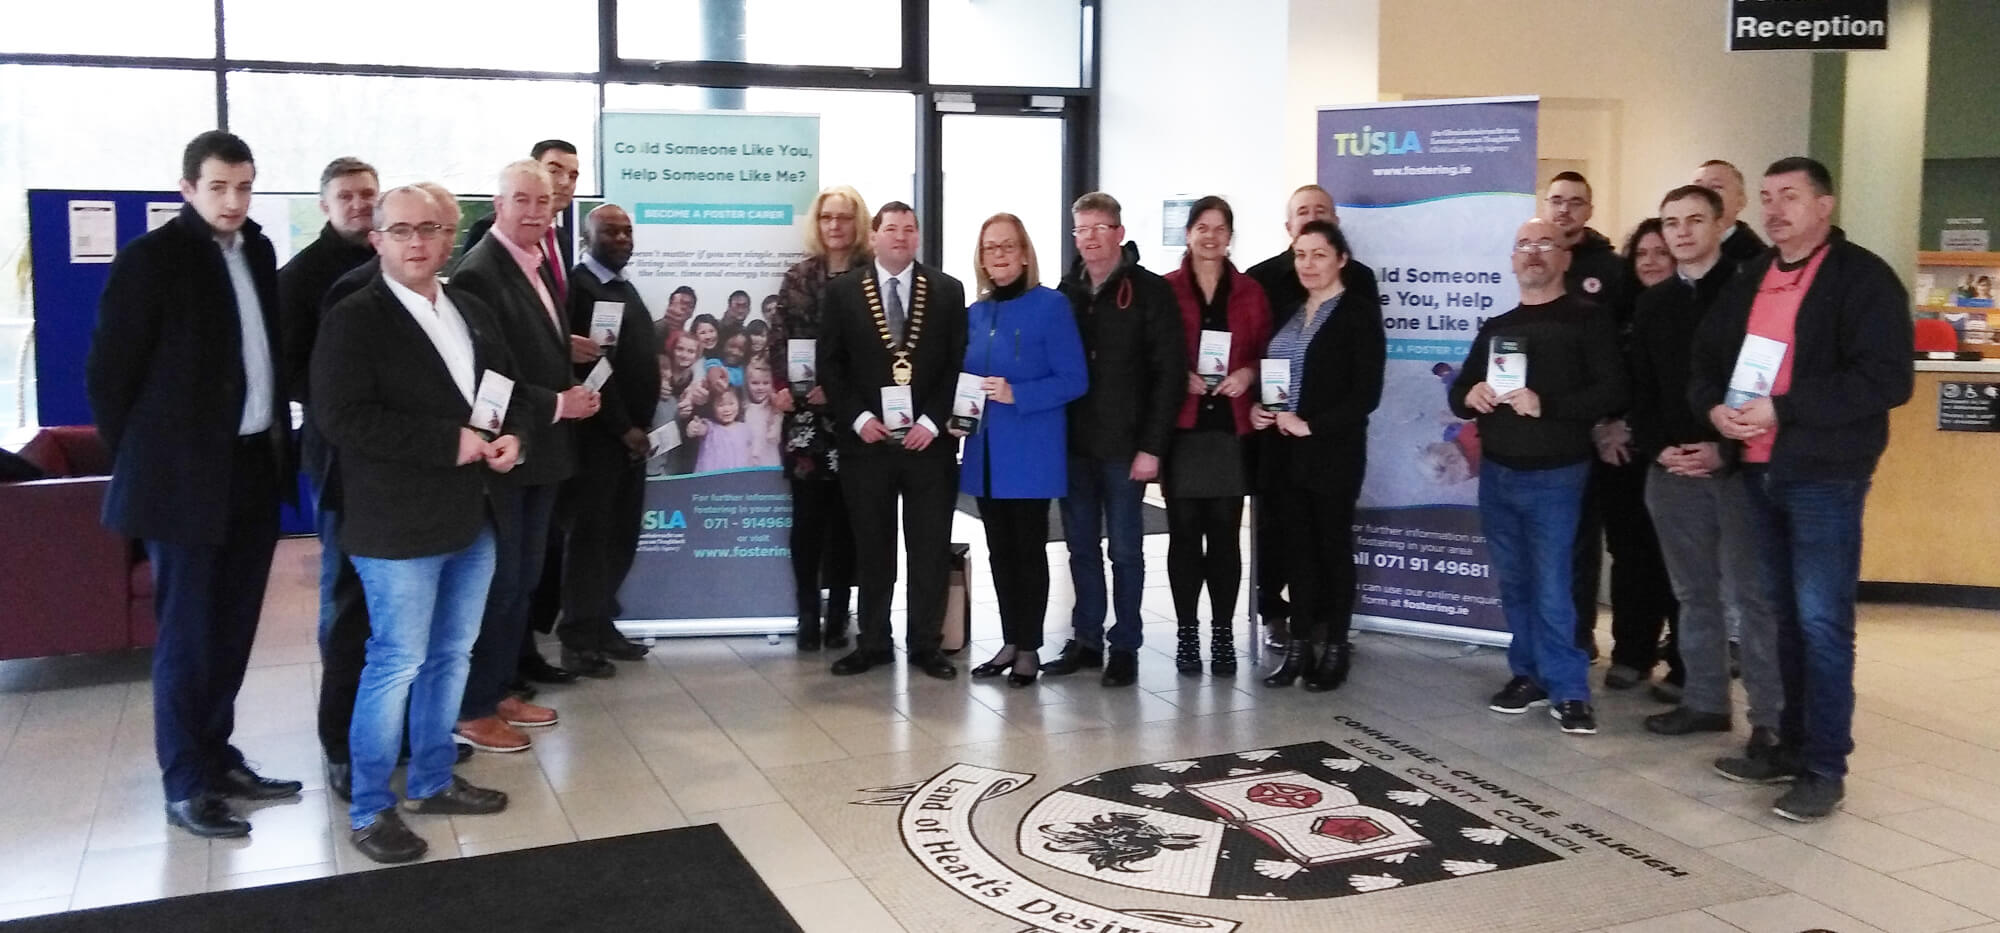 Foster Carer Information Stand Opened at County Hall